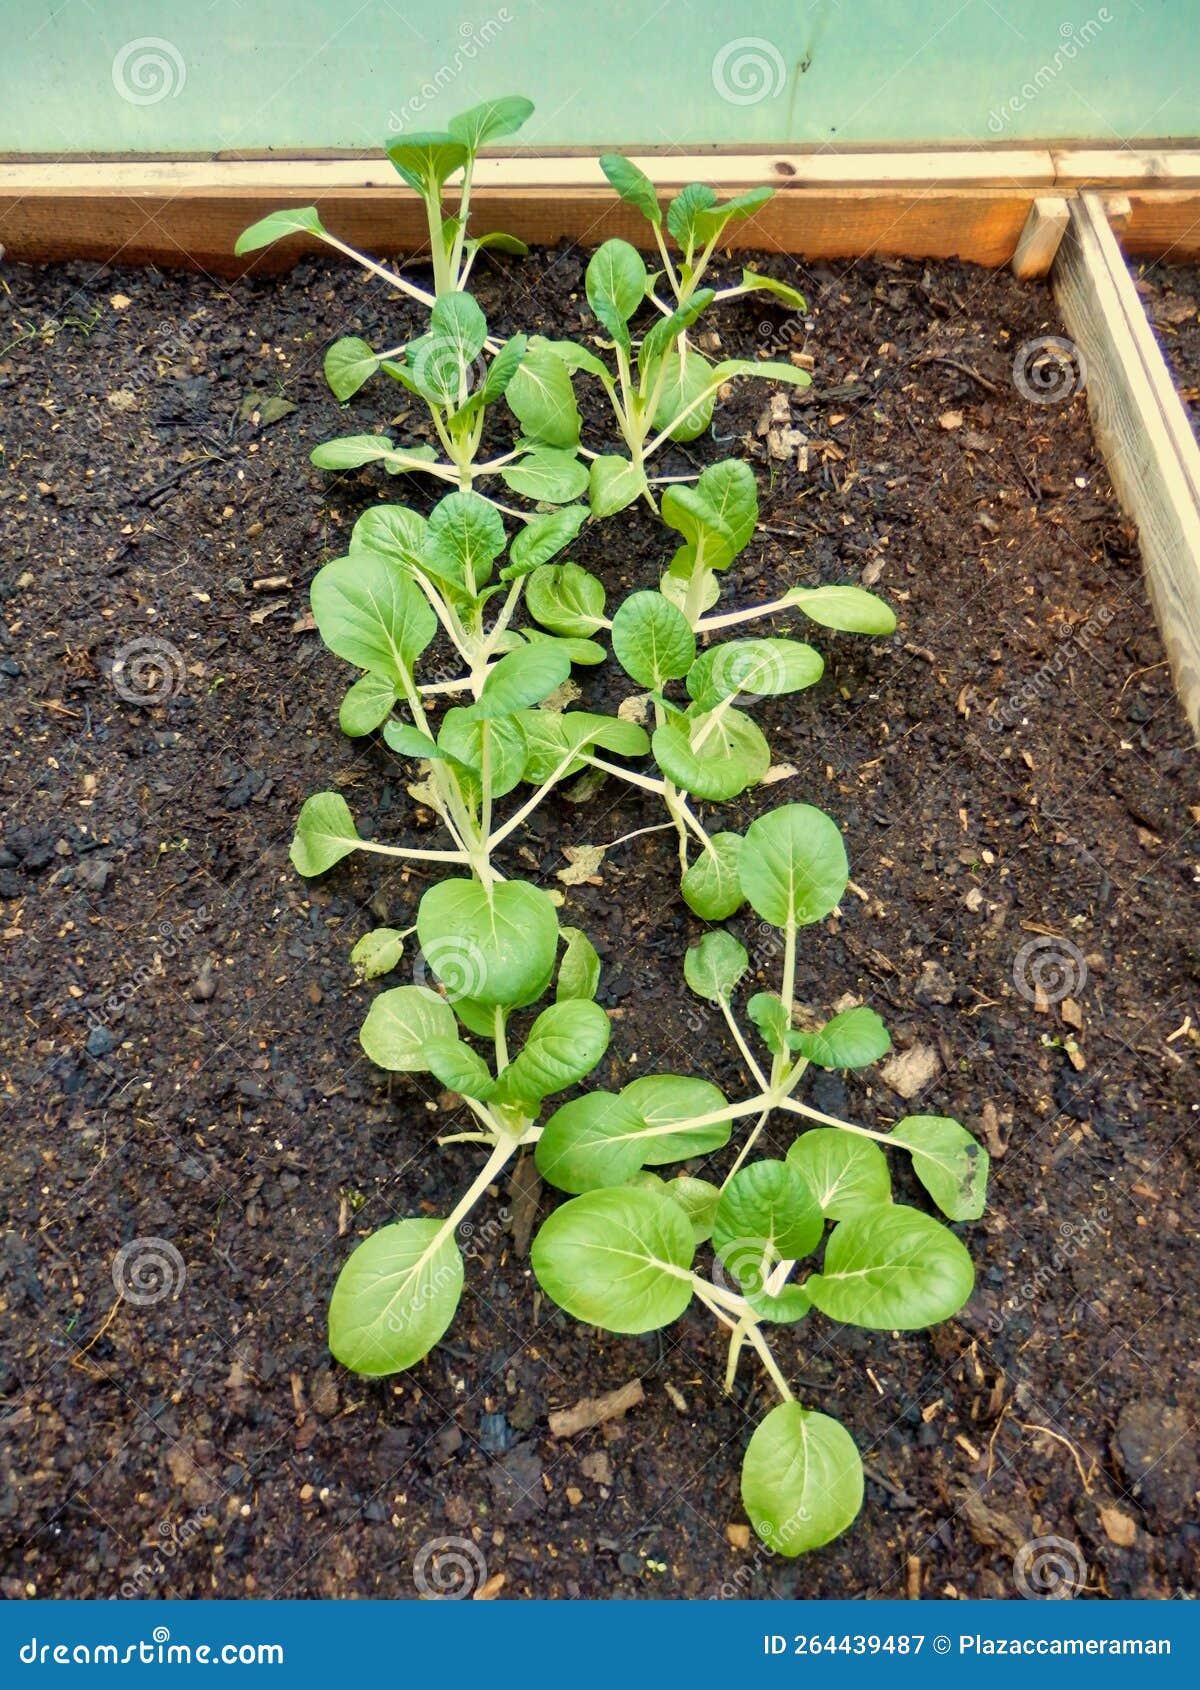 pak choi growing in a vegetable bed in a polytunnel